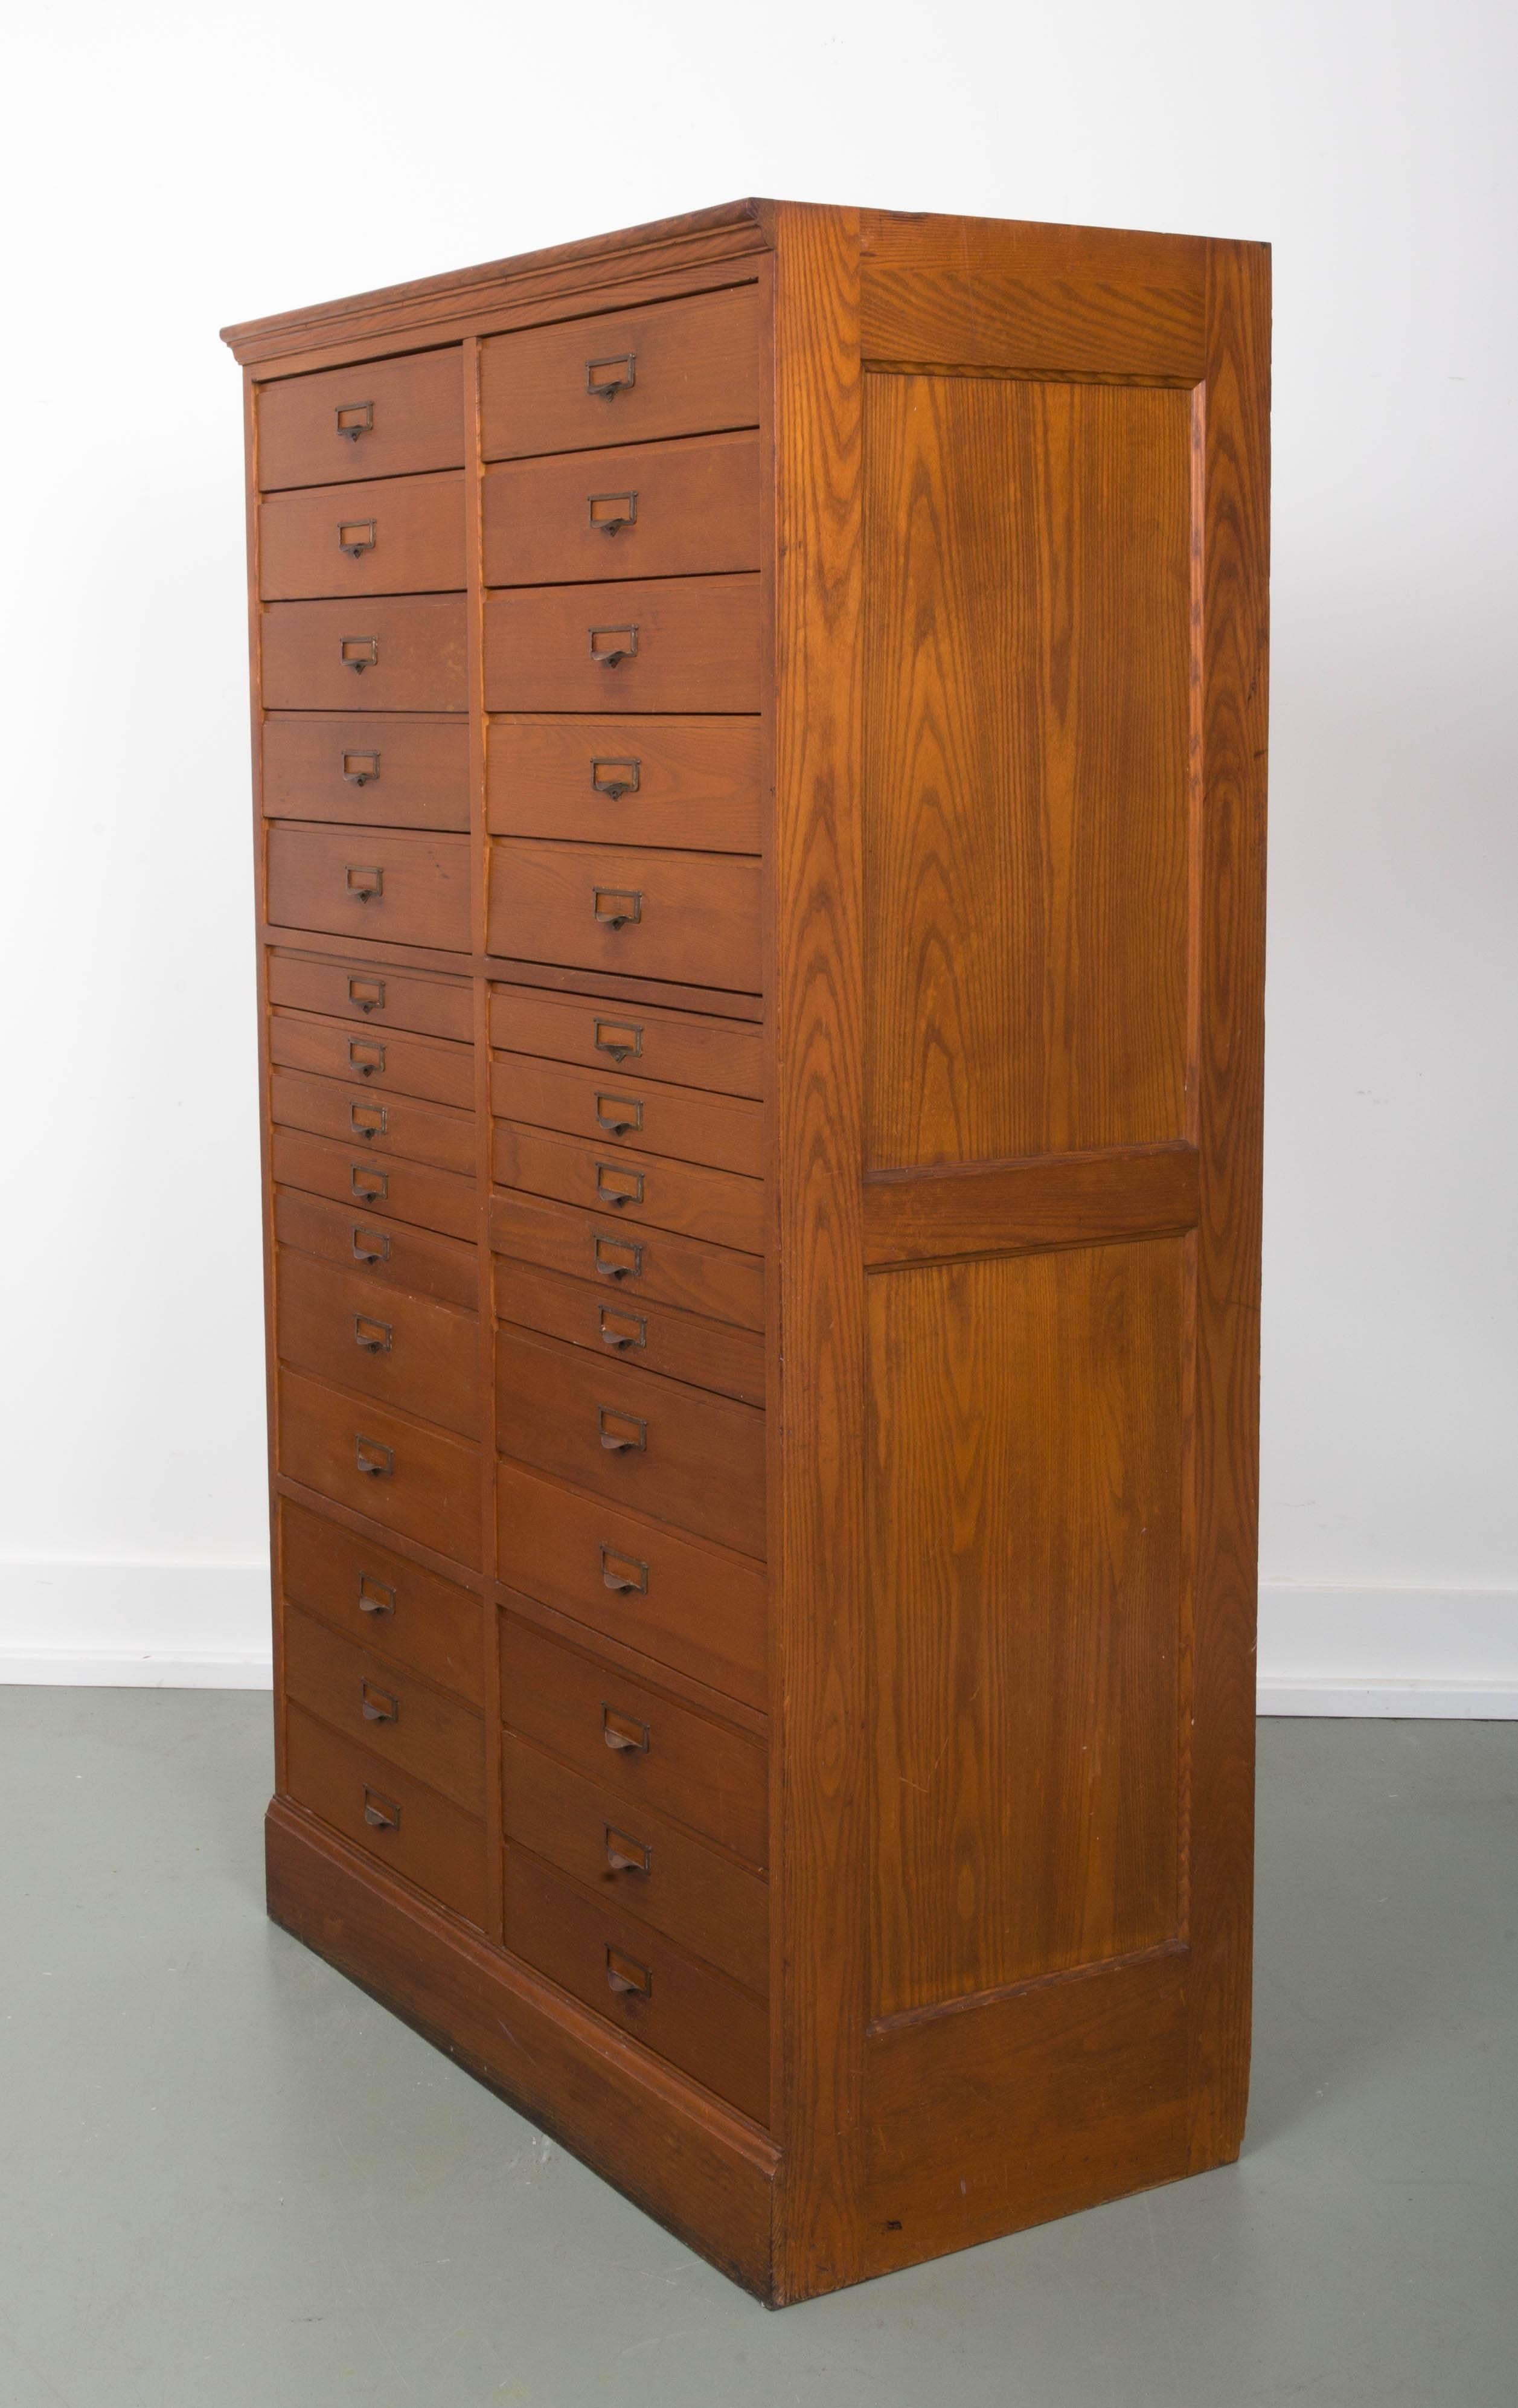 A wonderful 30-drawer architect cabinet for storage; original finish. The inside height of the top ten drawers measures is 3 1/4 inch 3 with holes. The next ten drawers measures are 1 1/2 inch height inside all with holes, and the bottom ten drawers